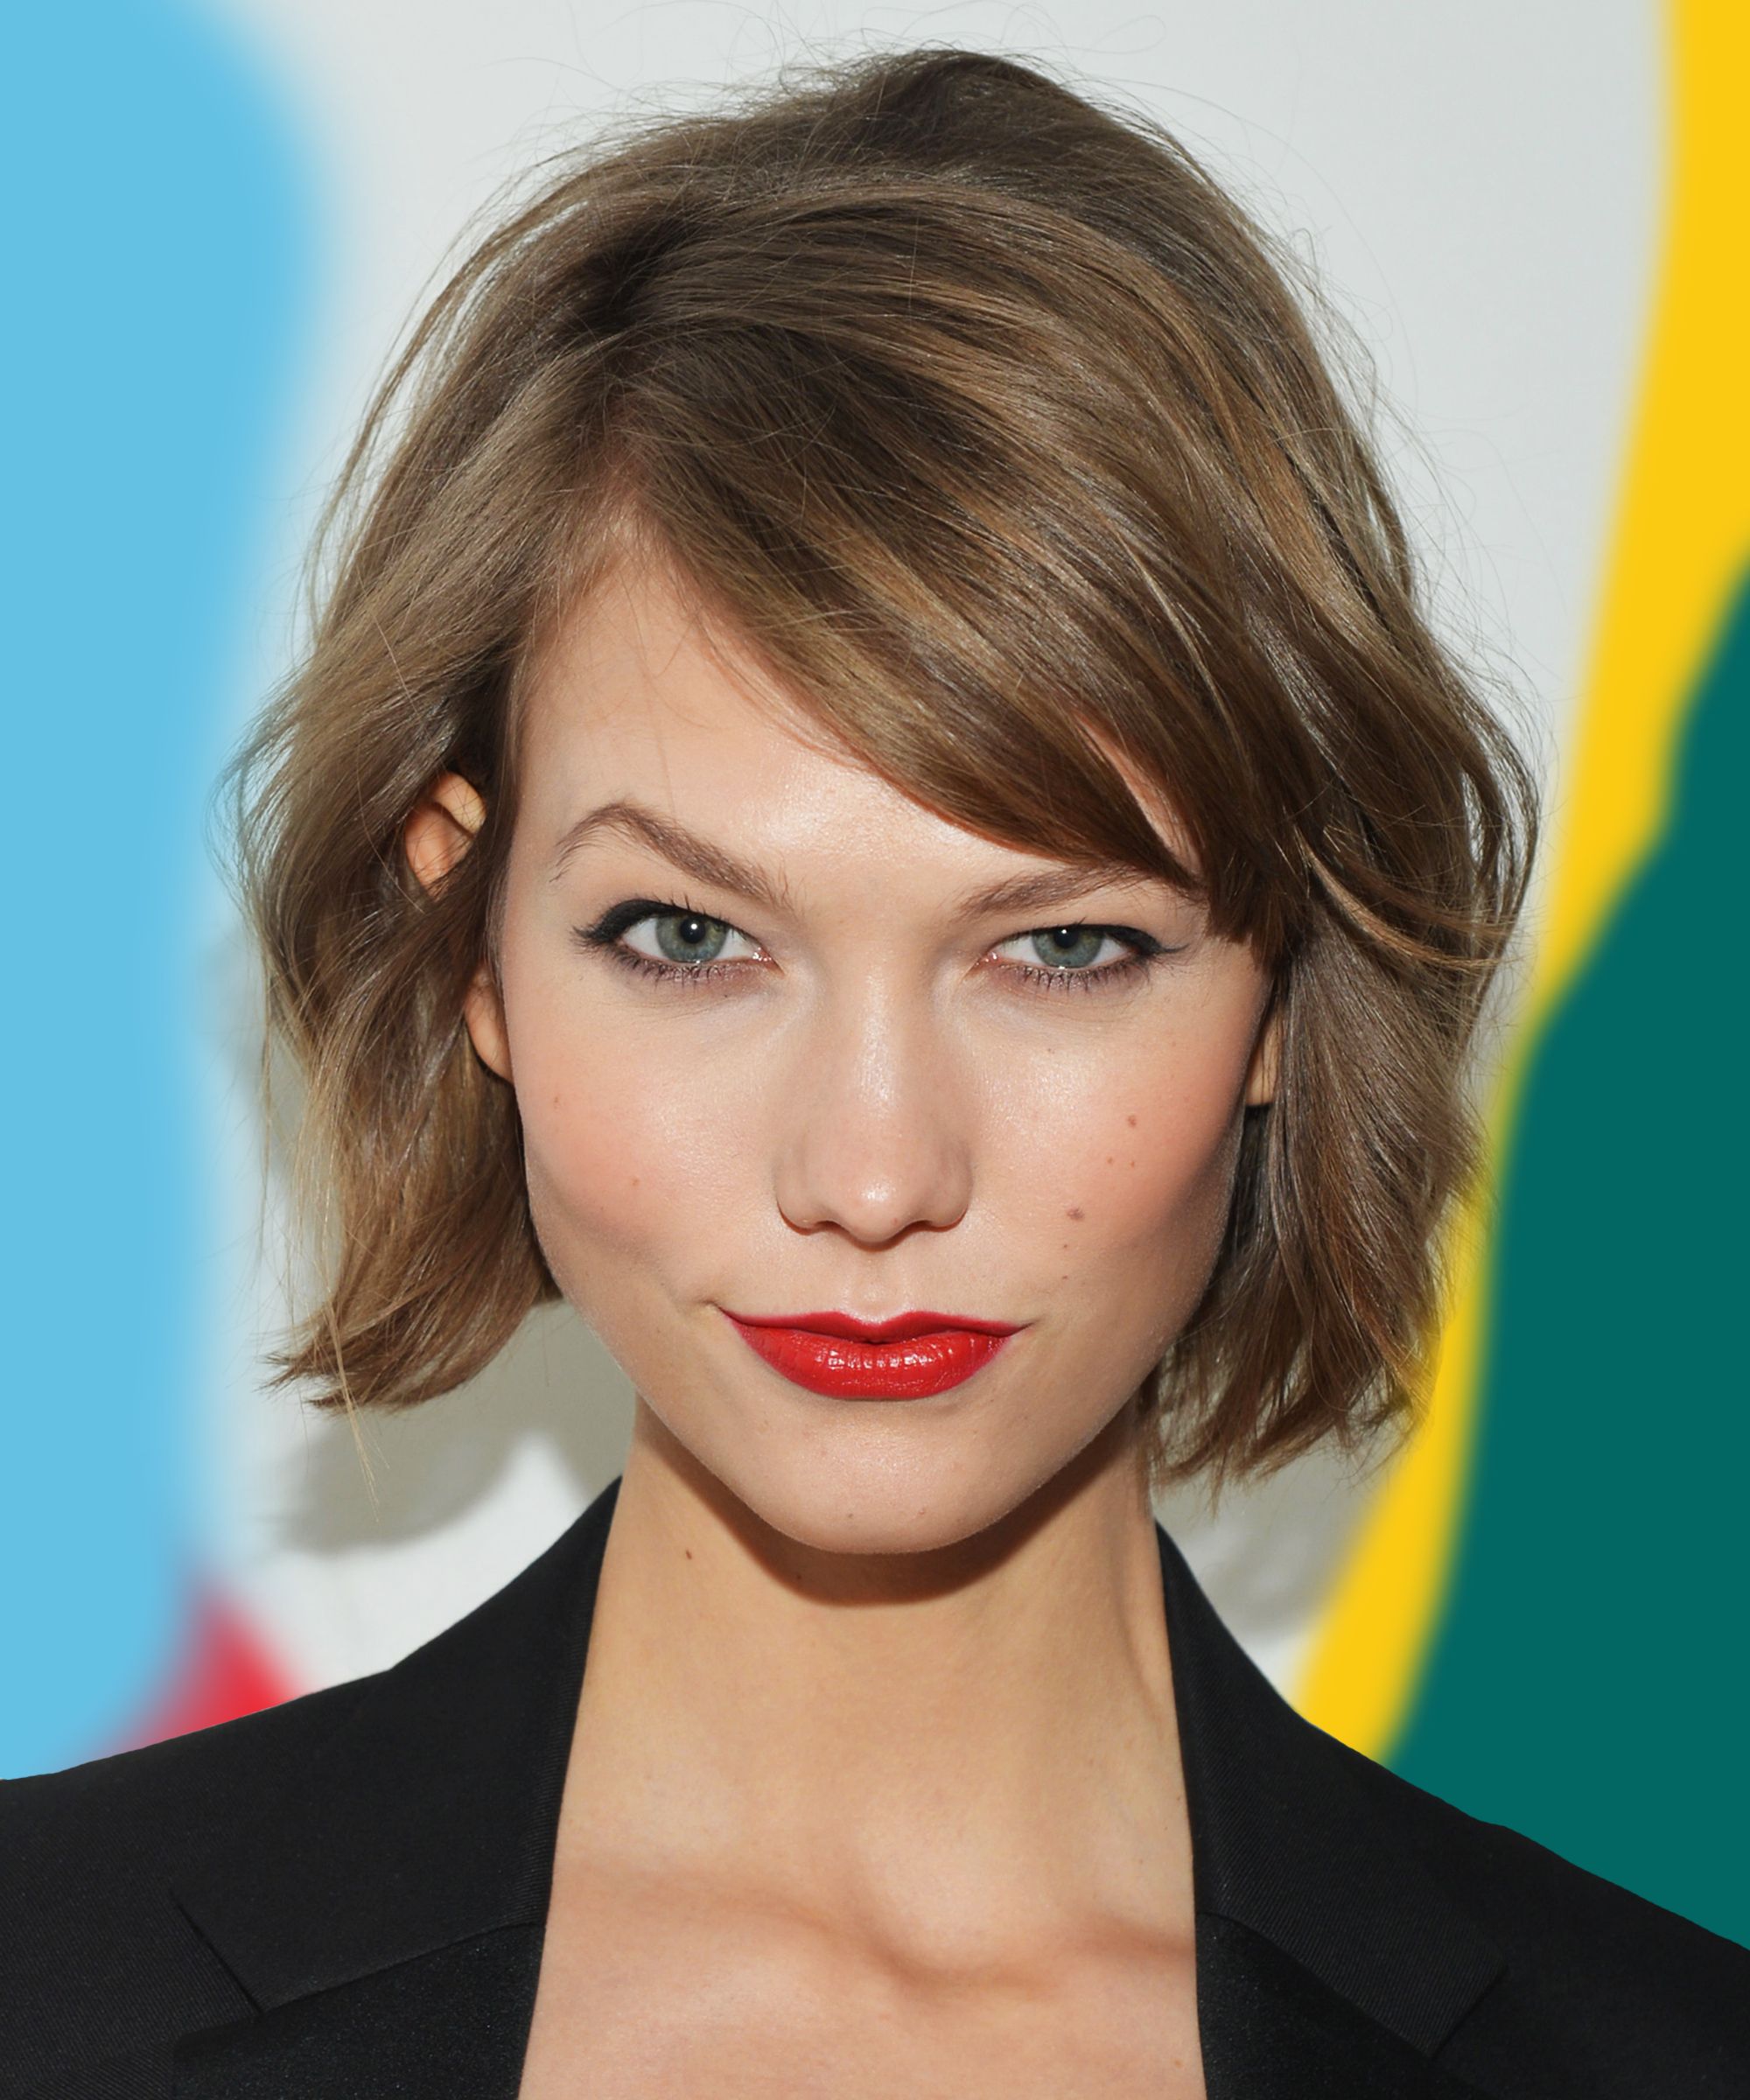 Popular Hairstyles Celebrity Photos Over The Years Throughout Short Haircuts For Celebrities (View 18 of 25)